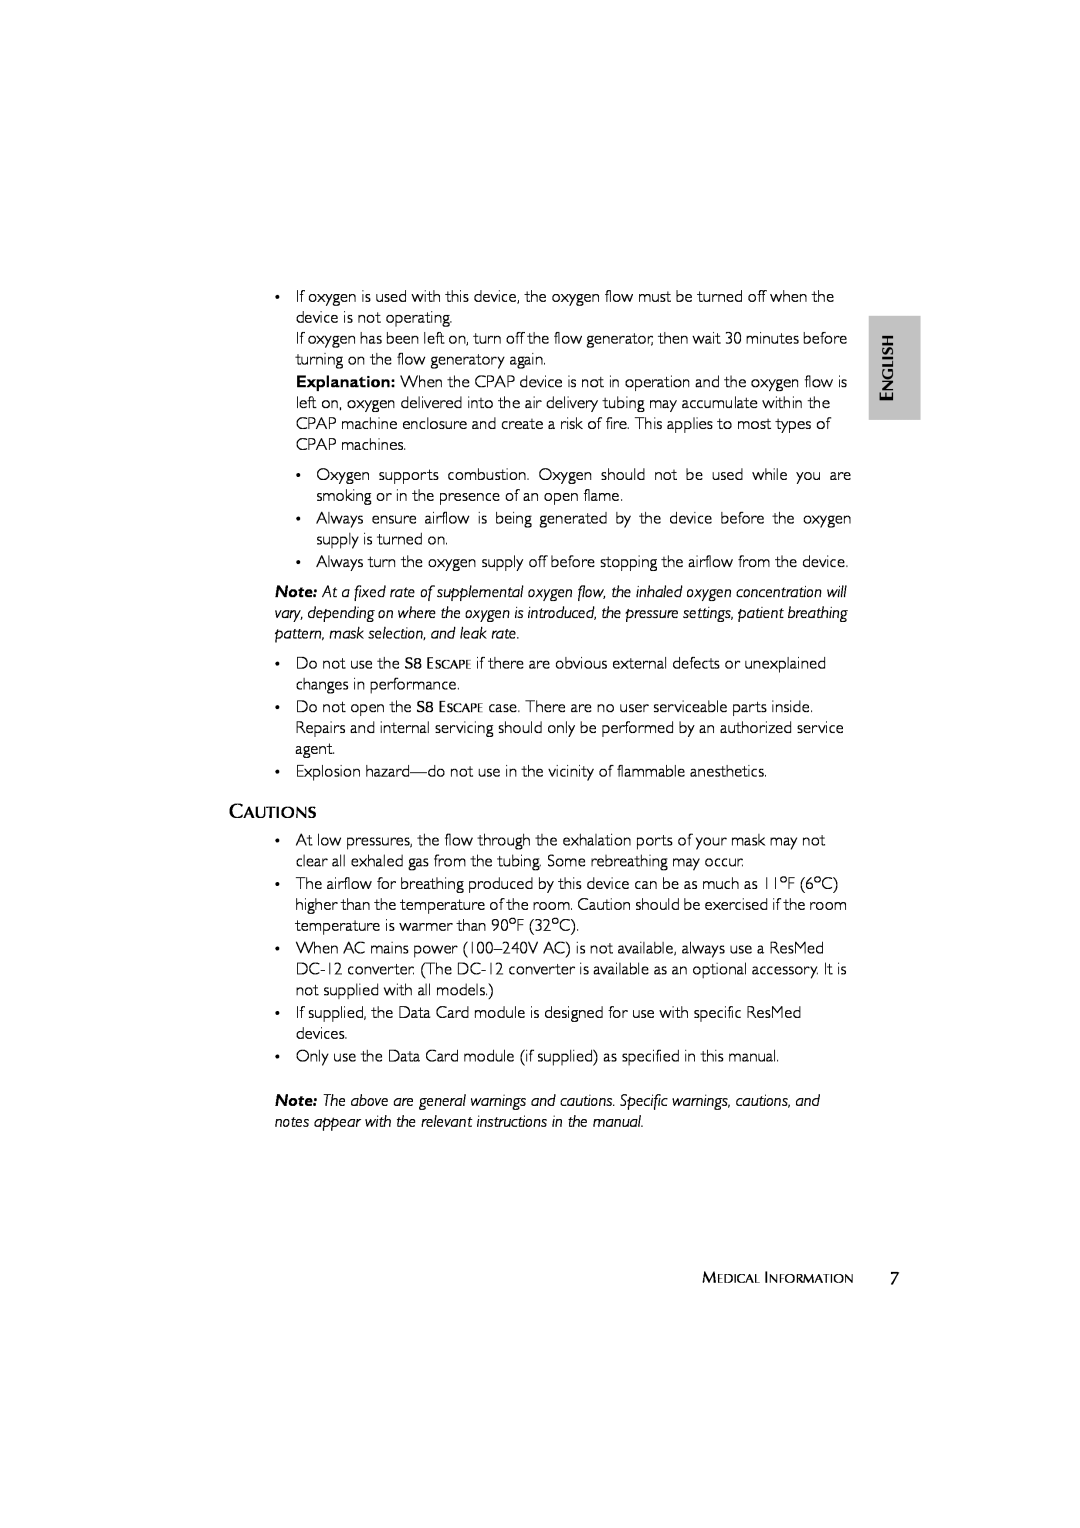 ResMed S8 ESCAPE SYSTEM, s8 user manual Cautions, English 